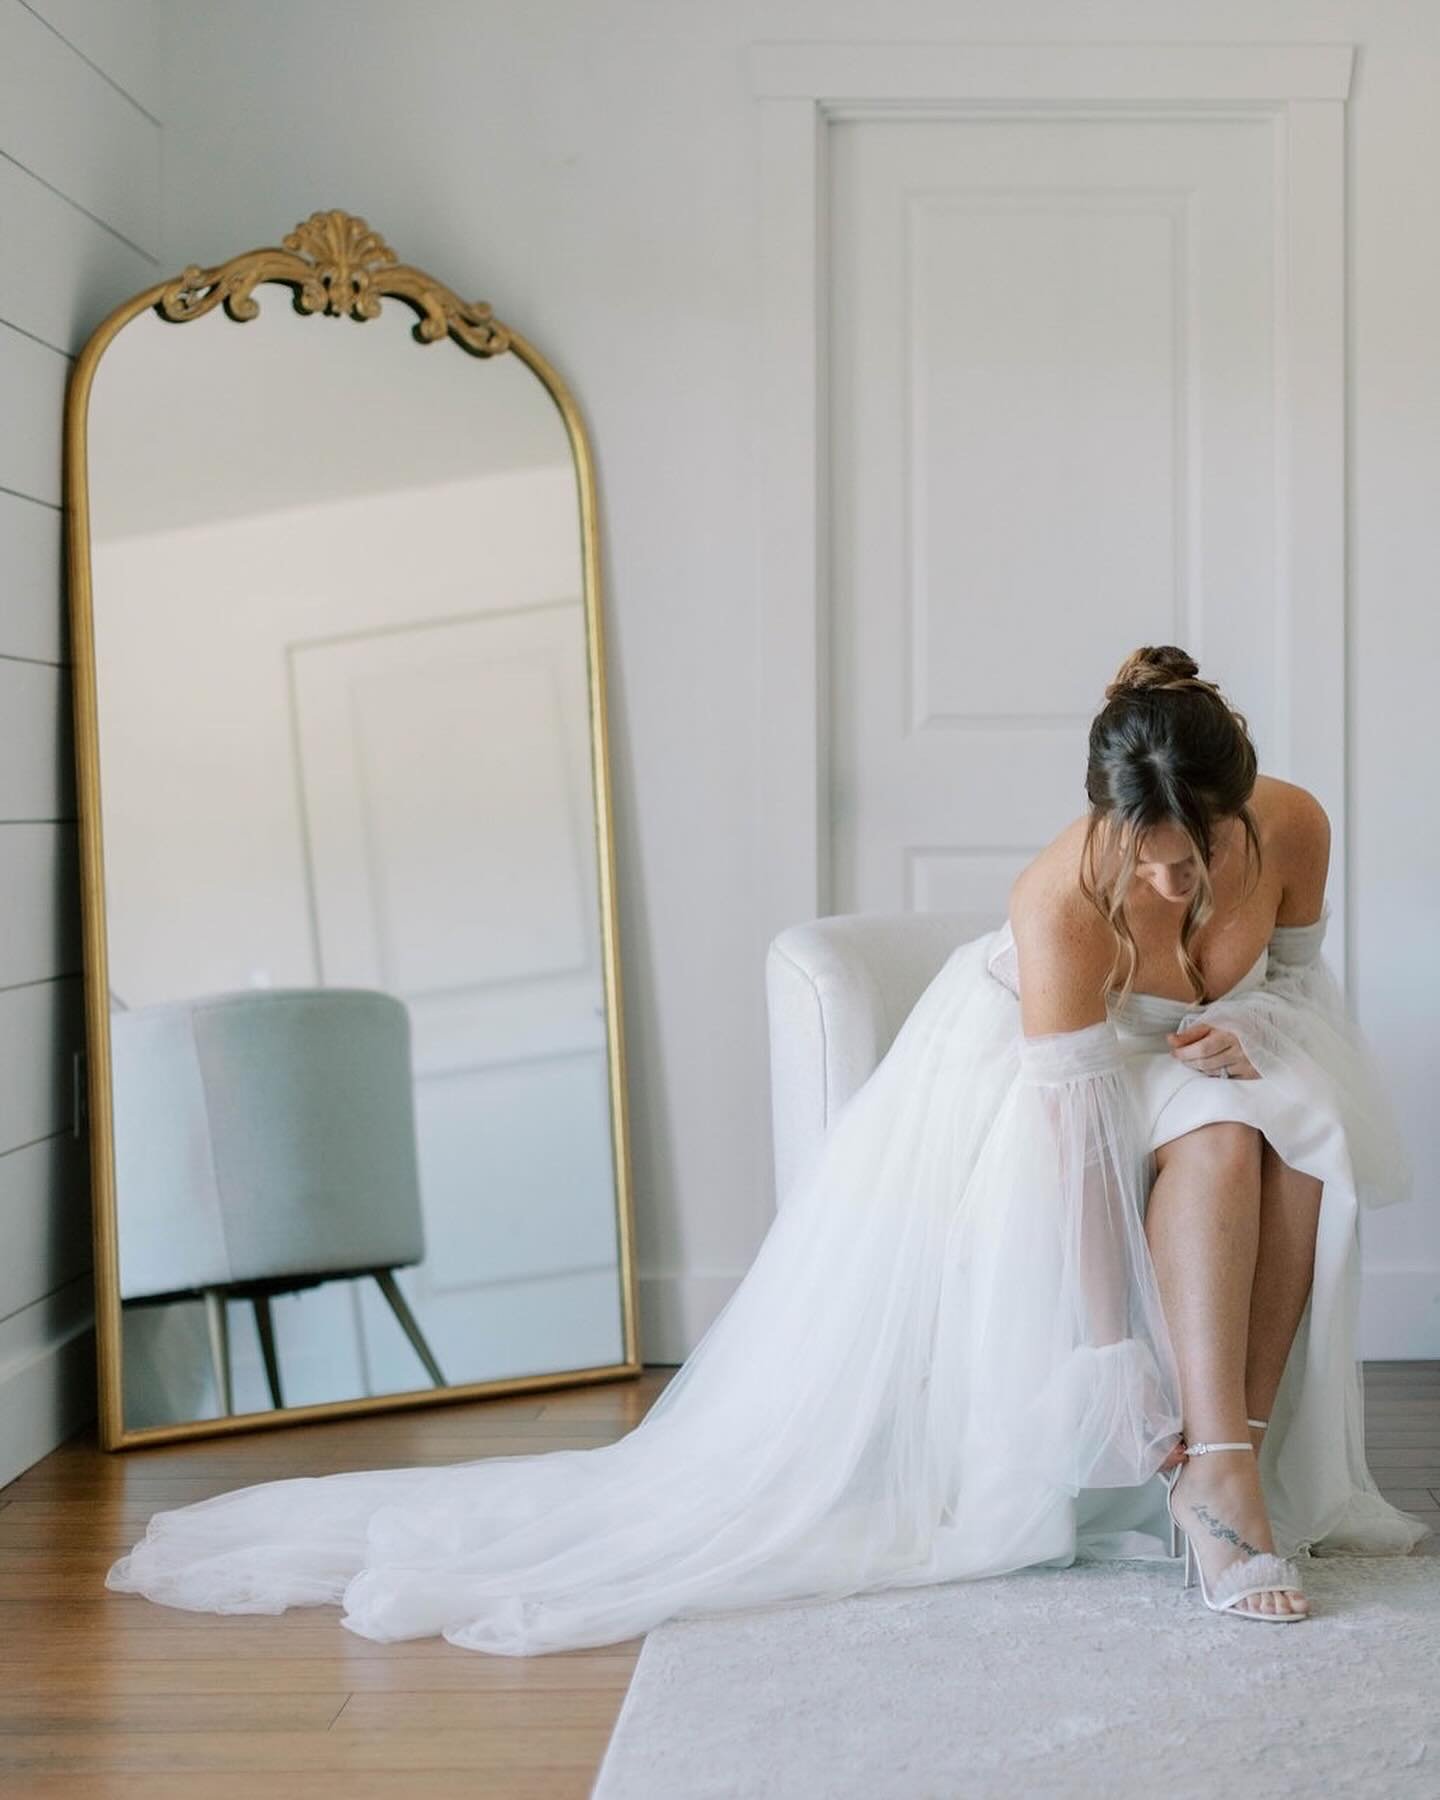 Where will you get ready❔At Emerson Fields, we&rsquo;ve included a jaw-droppingly beautiful bridal dressing suite in the cost of the venue rental. You don&rsquo;t have to worry about additional charges for⤵️
⠀⠀⠀⠀⠀⠀⠀⠀⠀
&gt; Space for hair and makeup s